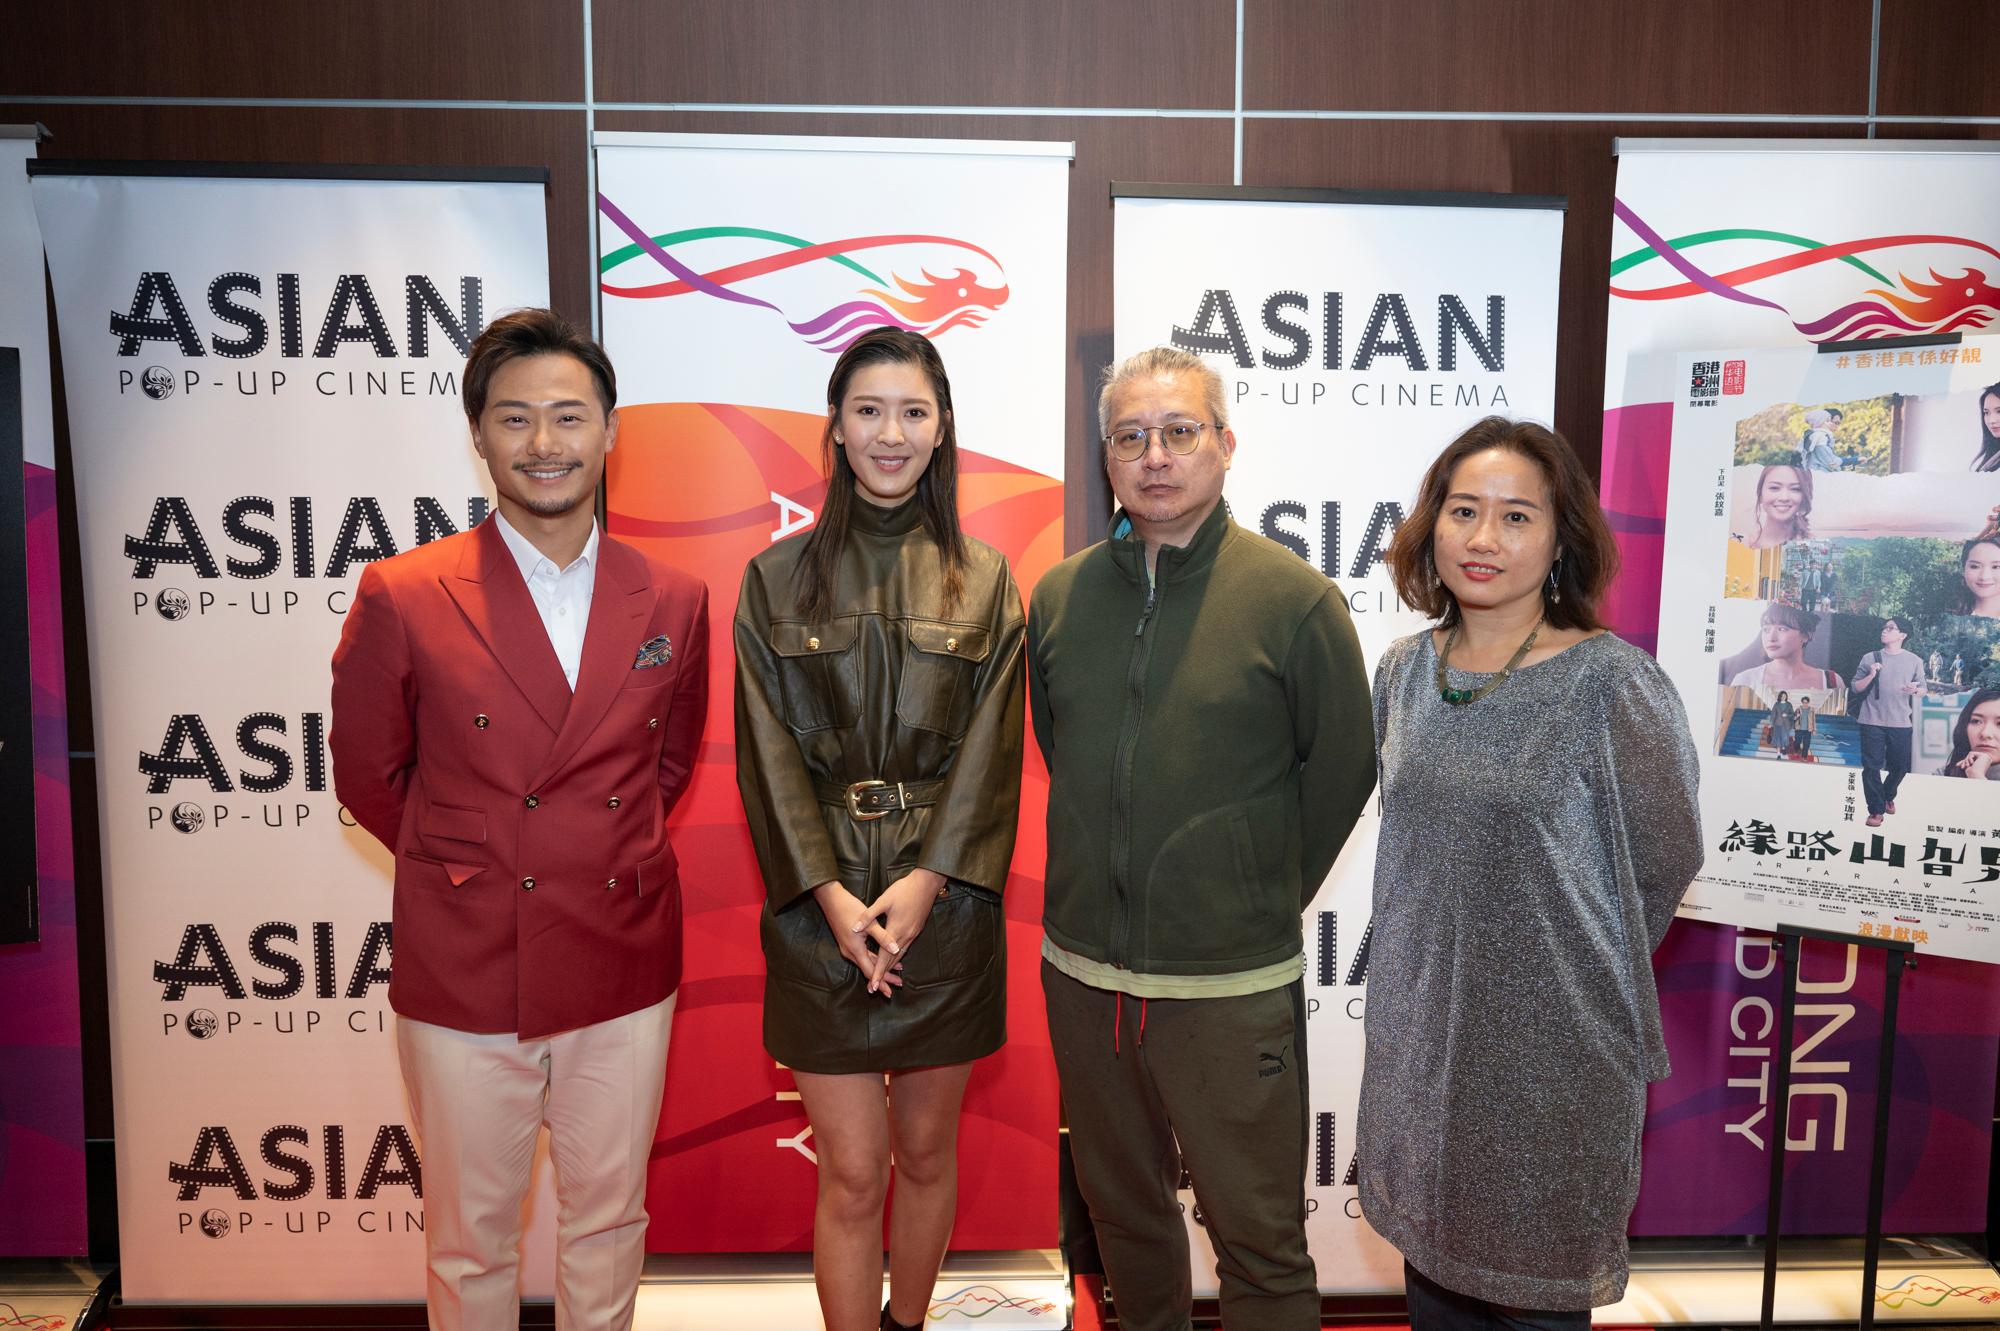 Attending today's Asian Pop-Up Cinema finale reception were (from left) the director of The First Girl I Loved, Yeung Chiu-hoi; actress Jennifer Yu; the director and the producer of Far Far Away, Amos Why and Teresa Kwong.